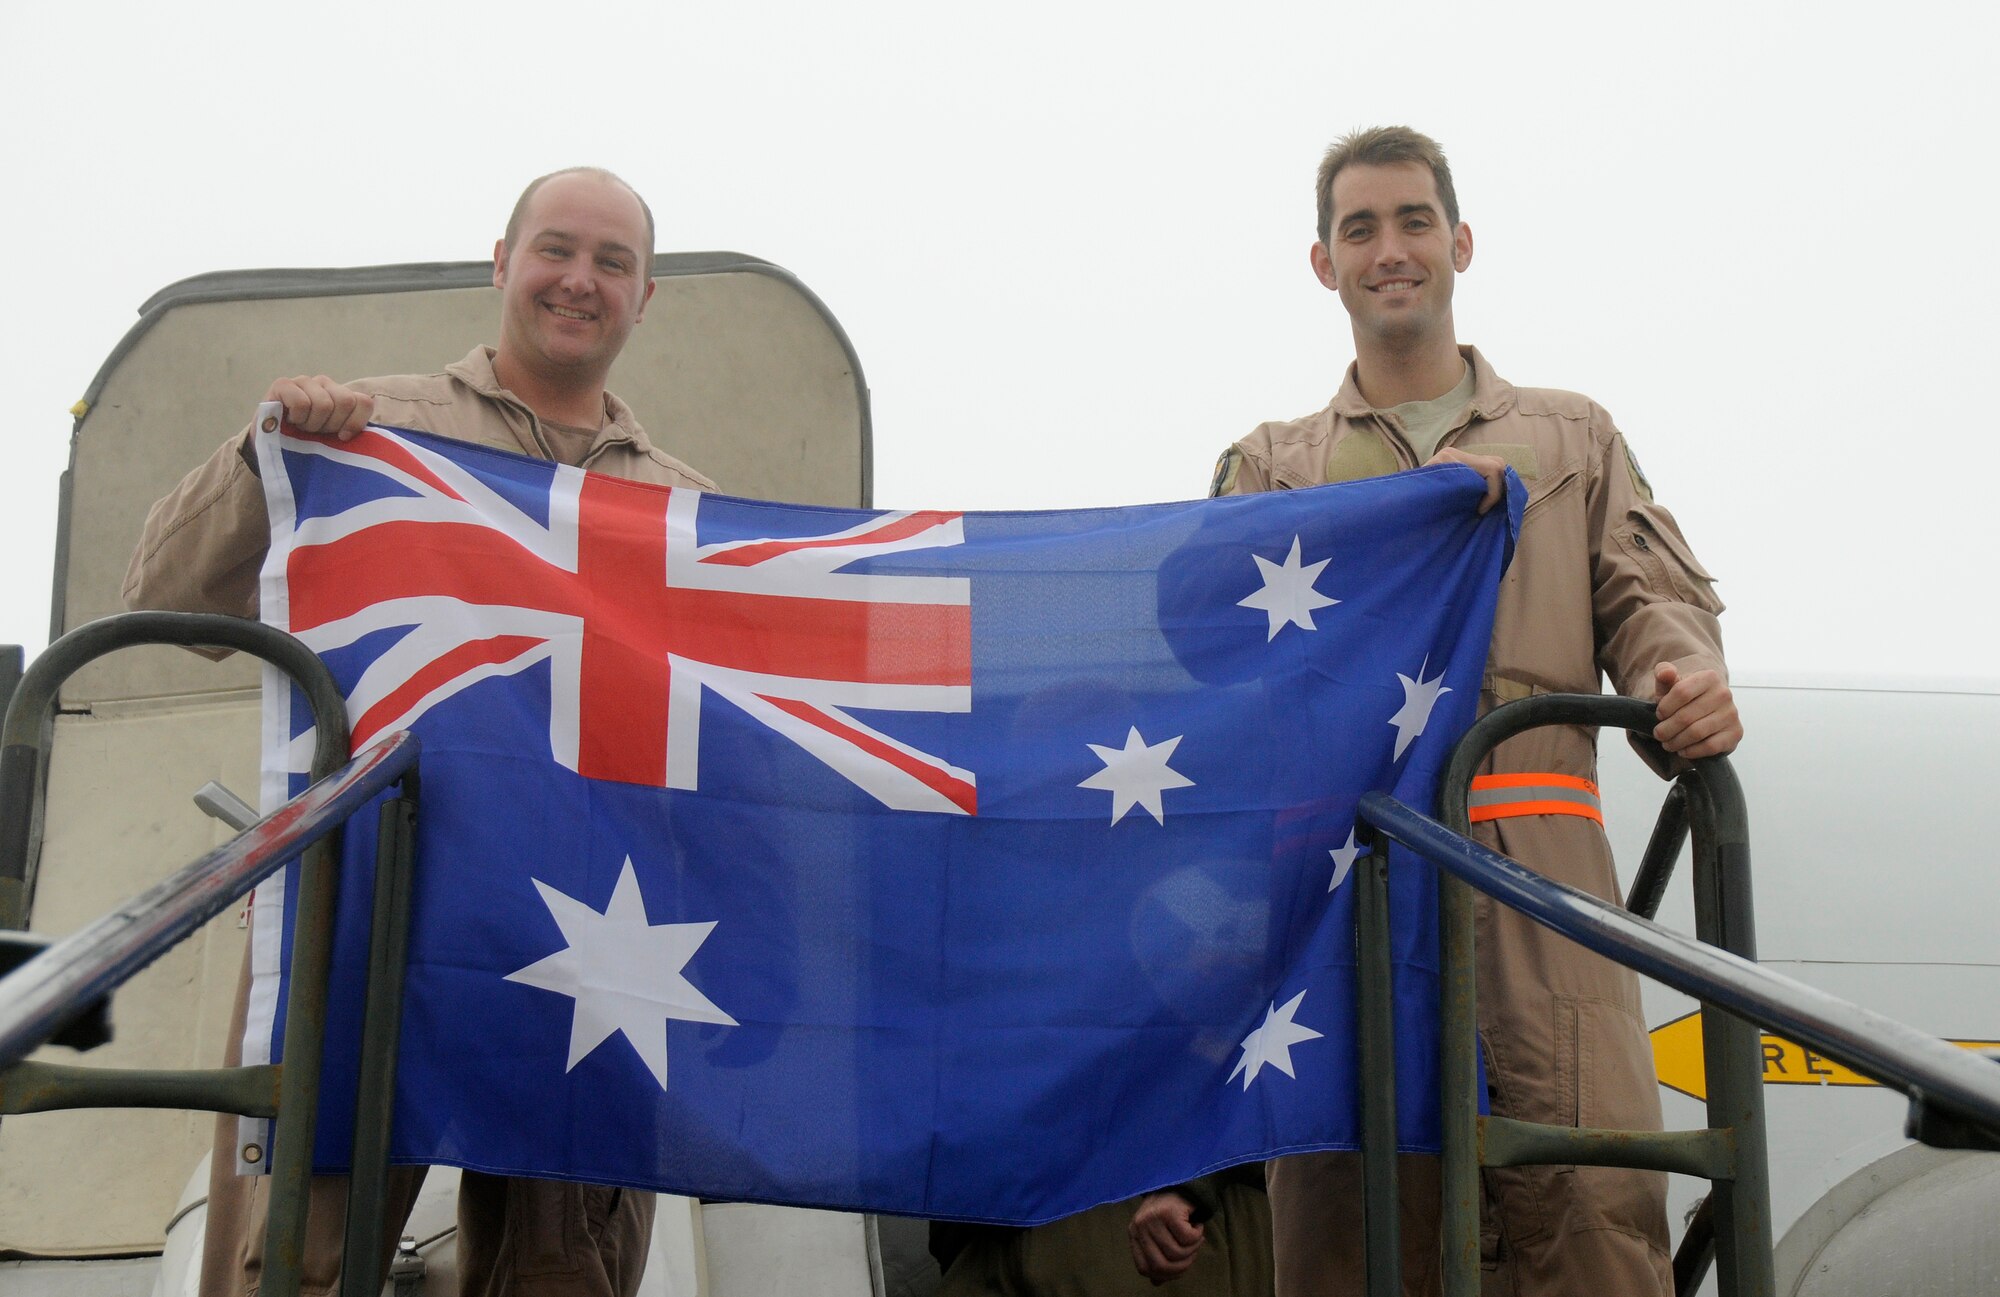 SOUTHWEST ASIA -- Flight Lieutenants Nathan Yabsley and Troy Roempke with the 965th Expeditionary Airborne Air Control Squadron proudly display the Australian flag here Dec. 24. They were preparing to fly their final mission with the 380th Air Expeditionary Wing before heading home to Australia. They have been with the 965th out of Tinker Air Force Base, Okla. for three years with the last four months in a deployed location gaining valuable frontline experience. While deployed with the 965th Flight Lieutenants Yablsey and Roempke have flown 20 missions in the area of responsibility in support of Operations Iraqi and Enduring Freedom. (U.S. Air Force photo/Tech. Sgt. Christopher A. Campbell)(released)